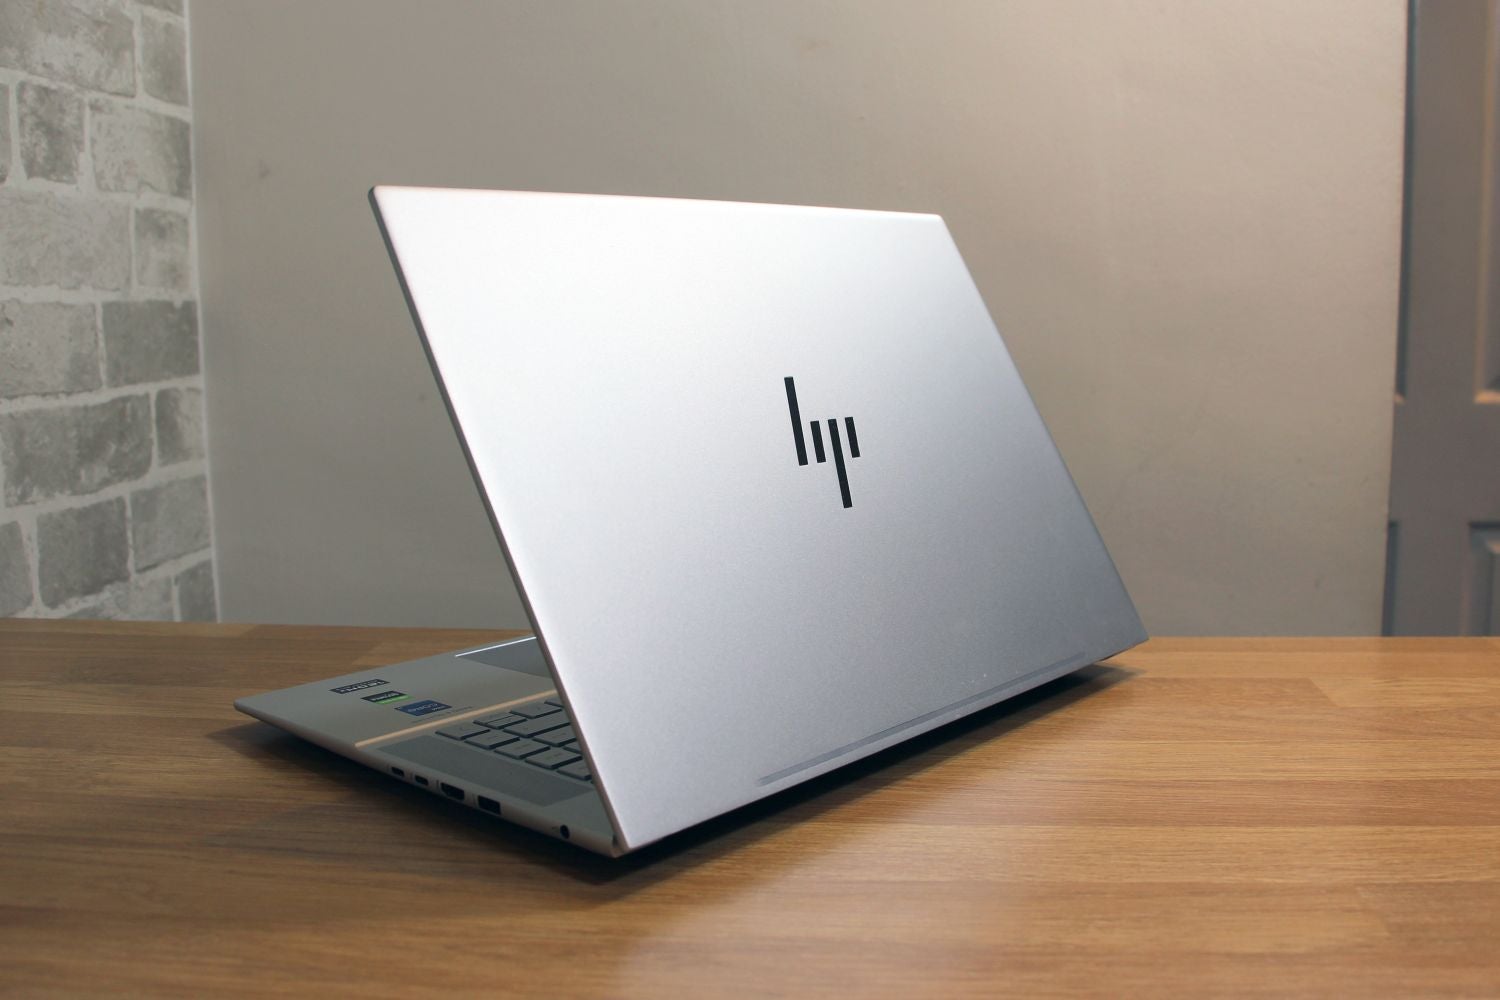 The highest HP laptops we have examined